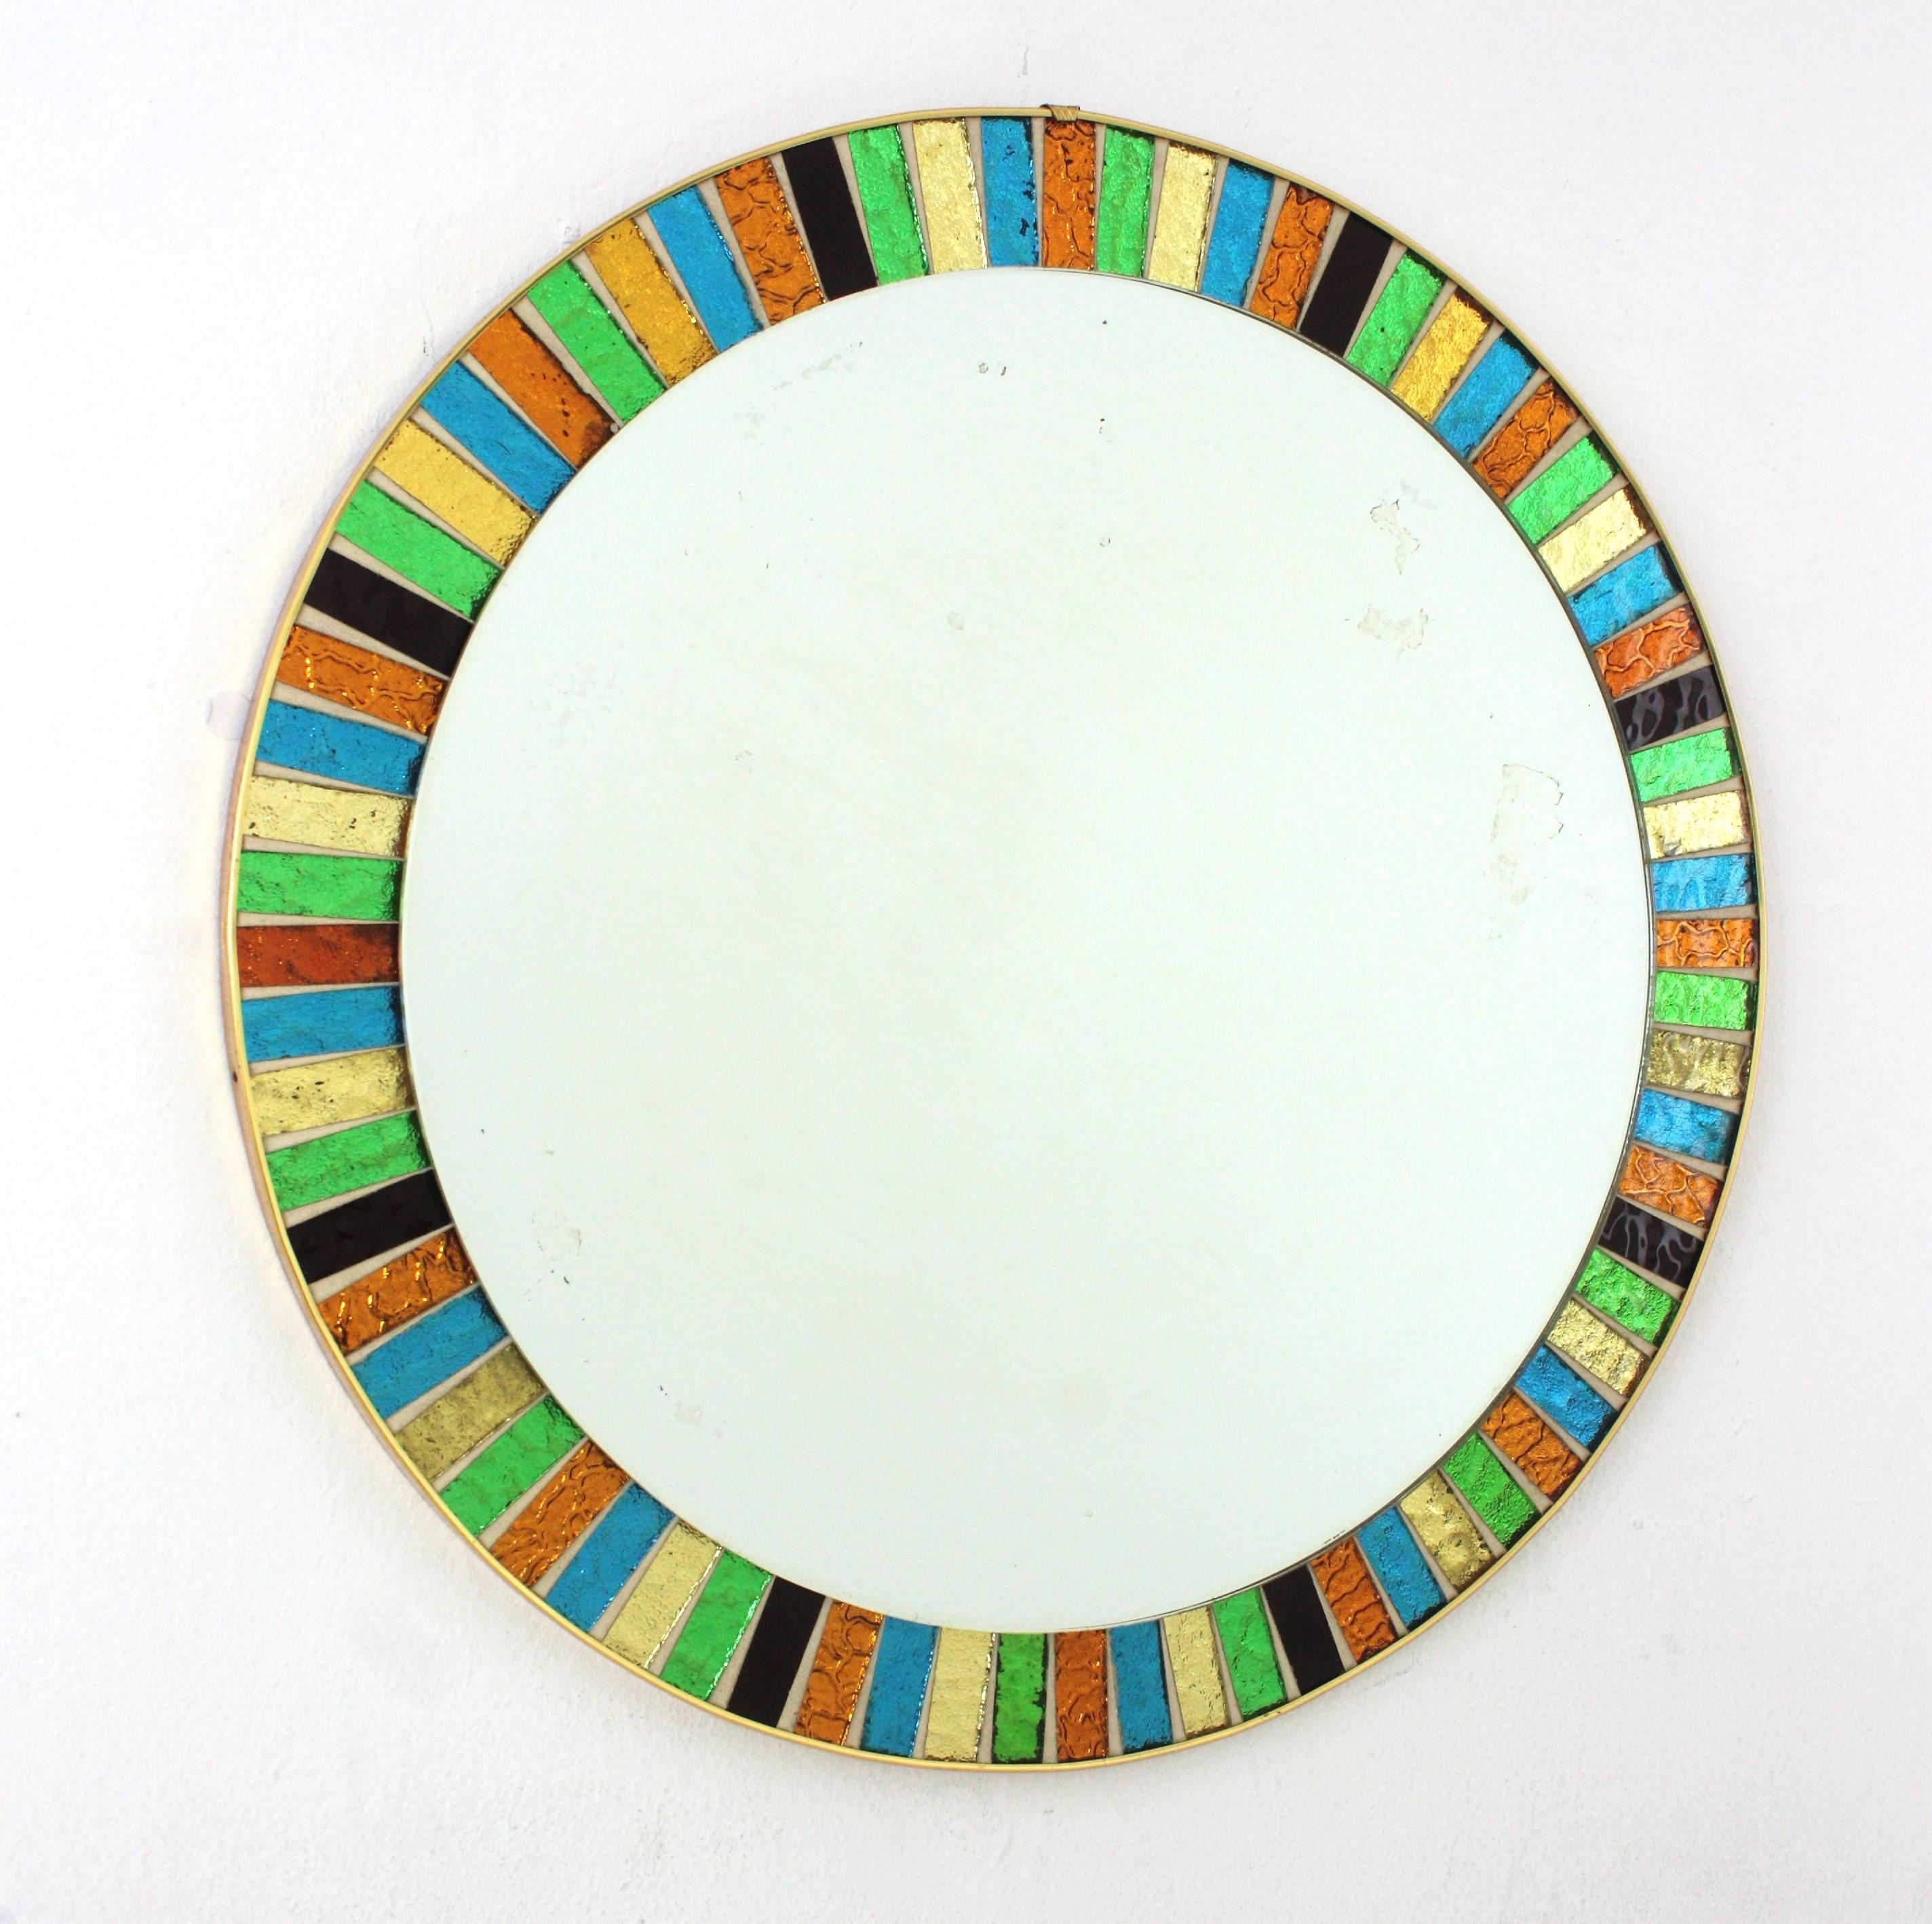 Mid-Century Modern Round Sunburst Multi-Color Mosaic Mirror, Spain, 1960s.
Eye-catching circular wall mirror featuring a frame made of pieces of textured colorful glass in yellow, green, orange, blue and garnet creating a sunburst pattern. 
Good